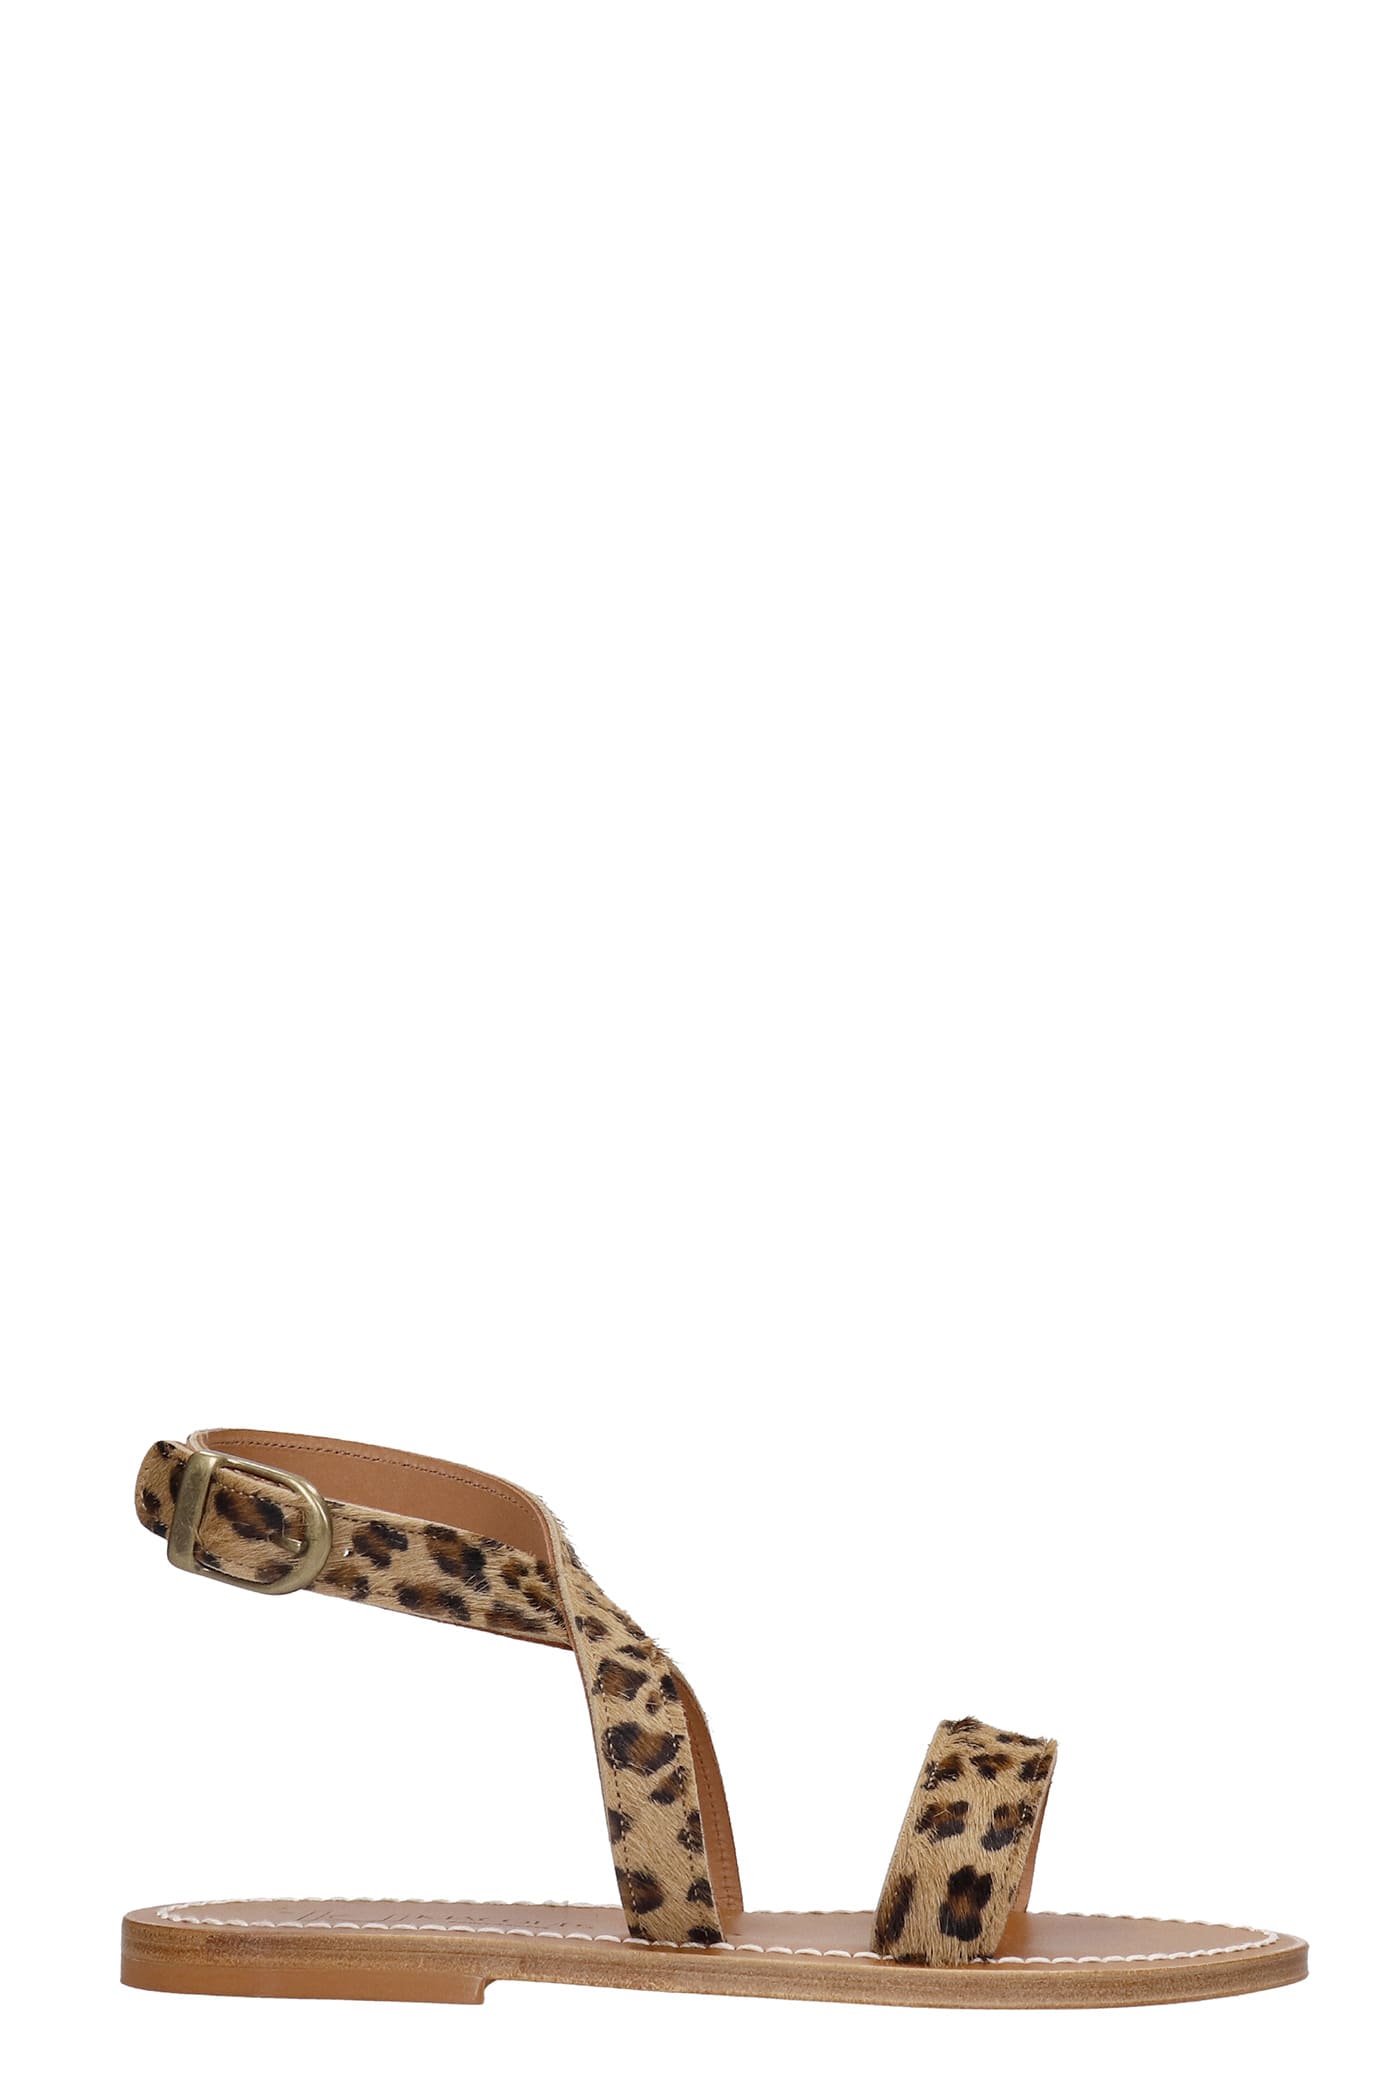 K.Jacques Calfat Flats In Animalier Pony Skin